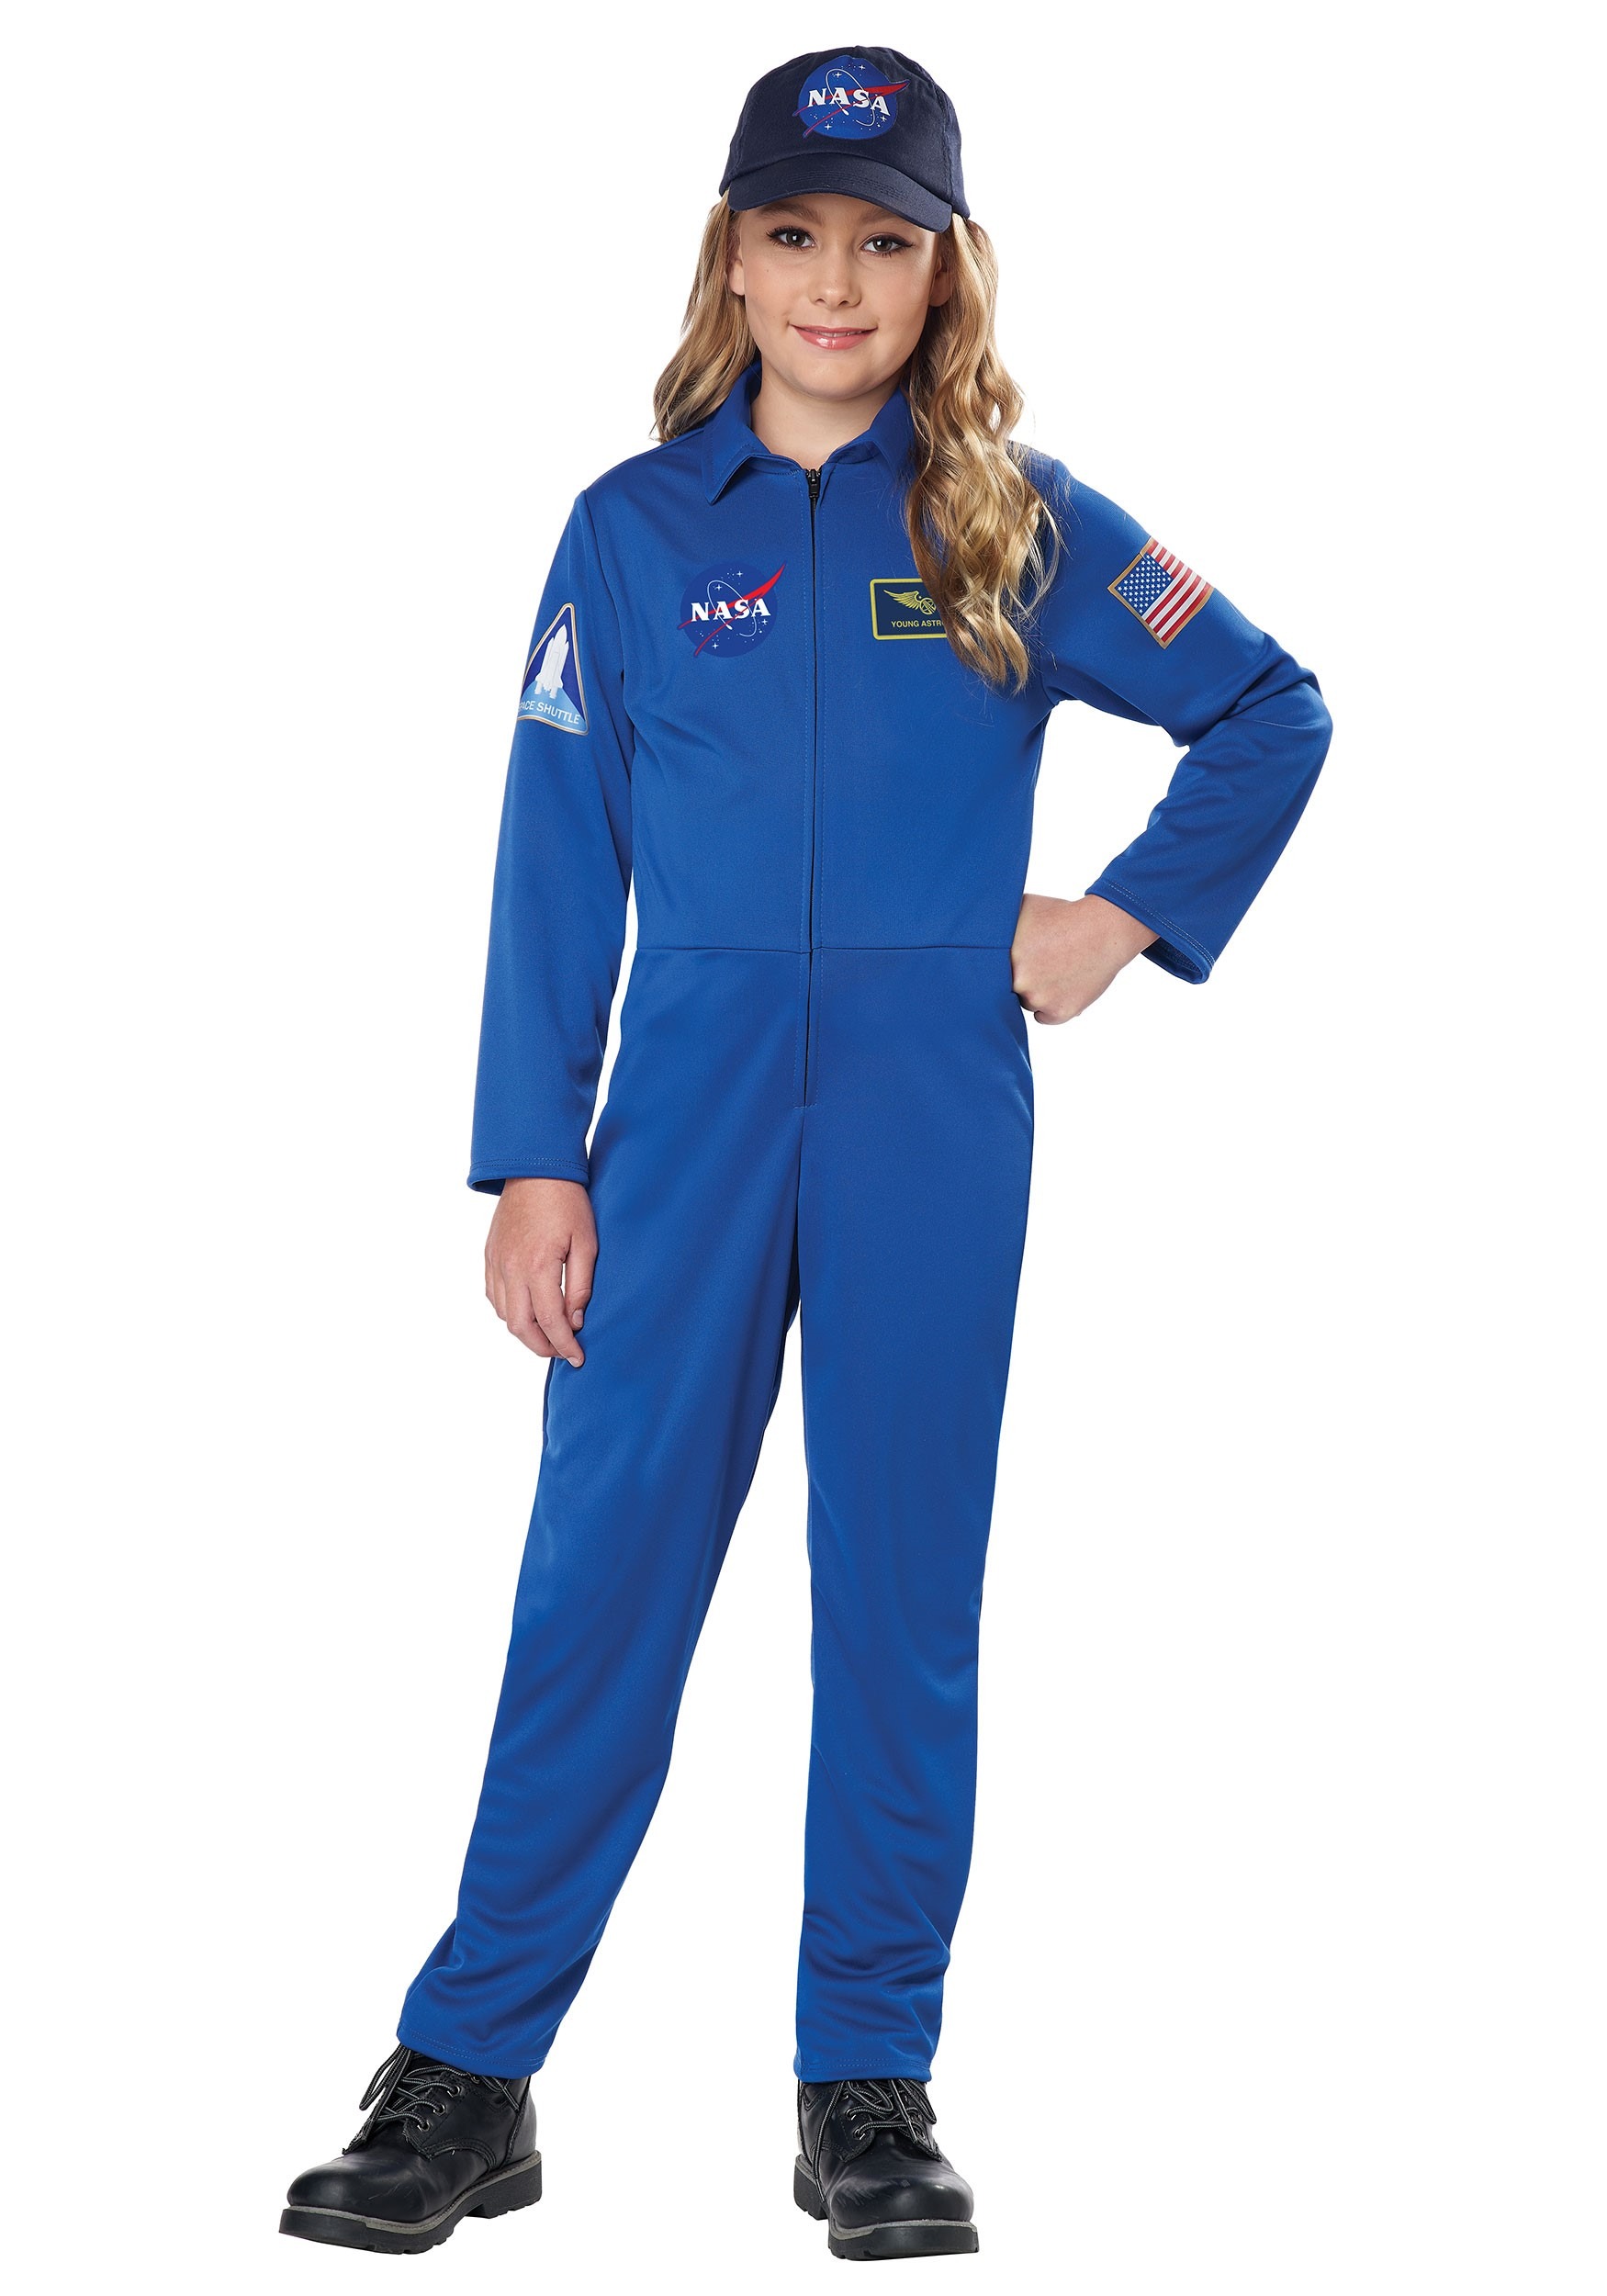 Photos - Fancy Dress California Costume Collection NASA Blue Jumpsuit Costume For Kids Blue CA0 